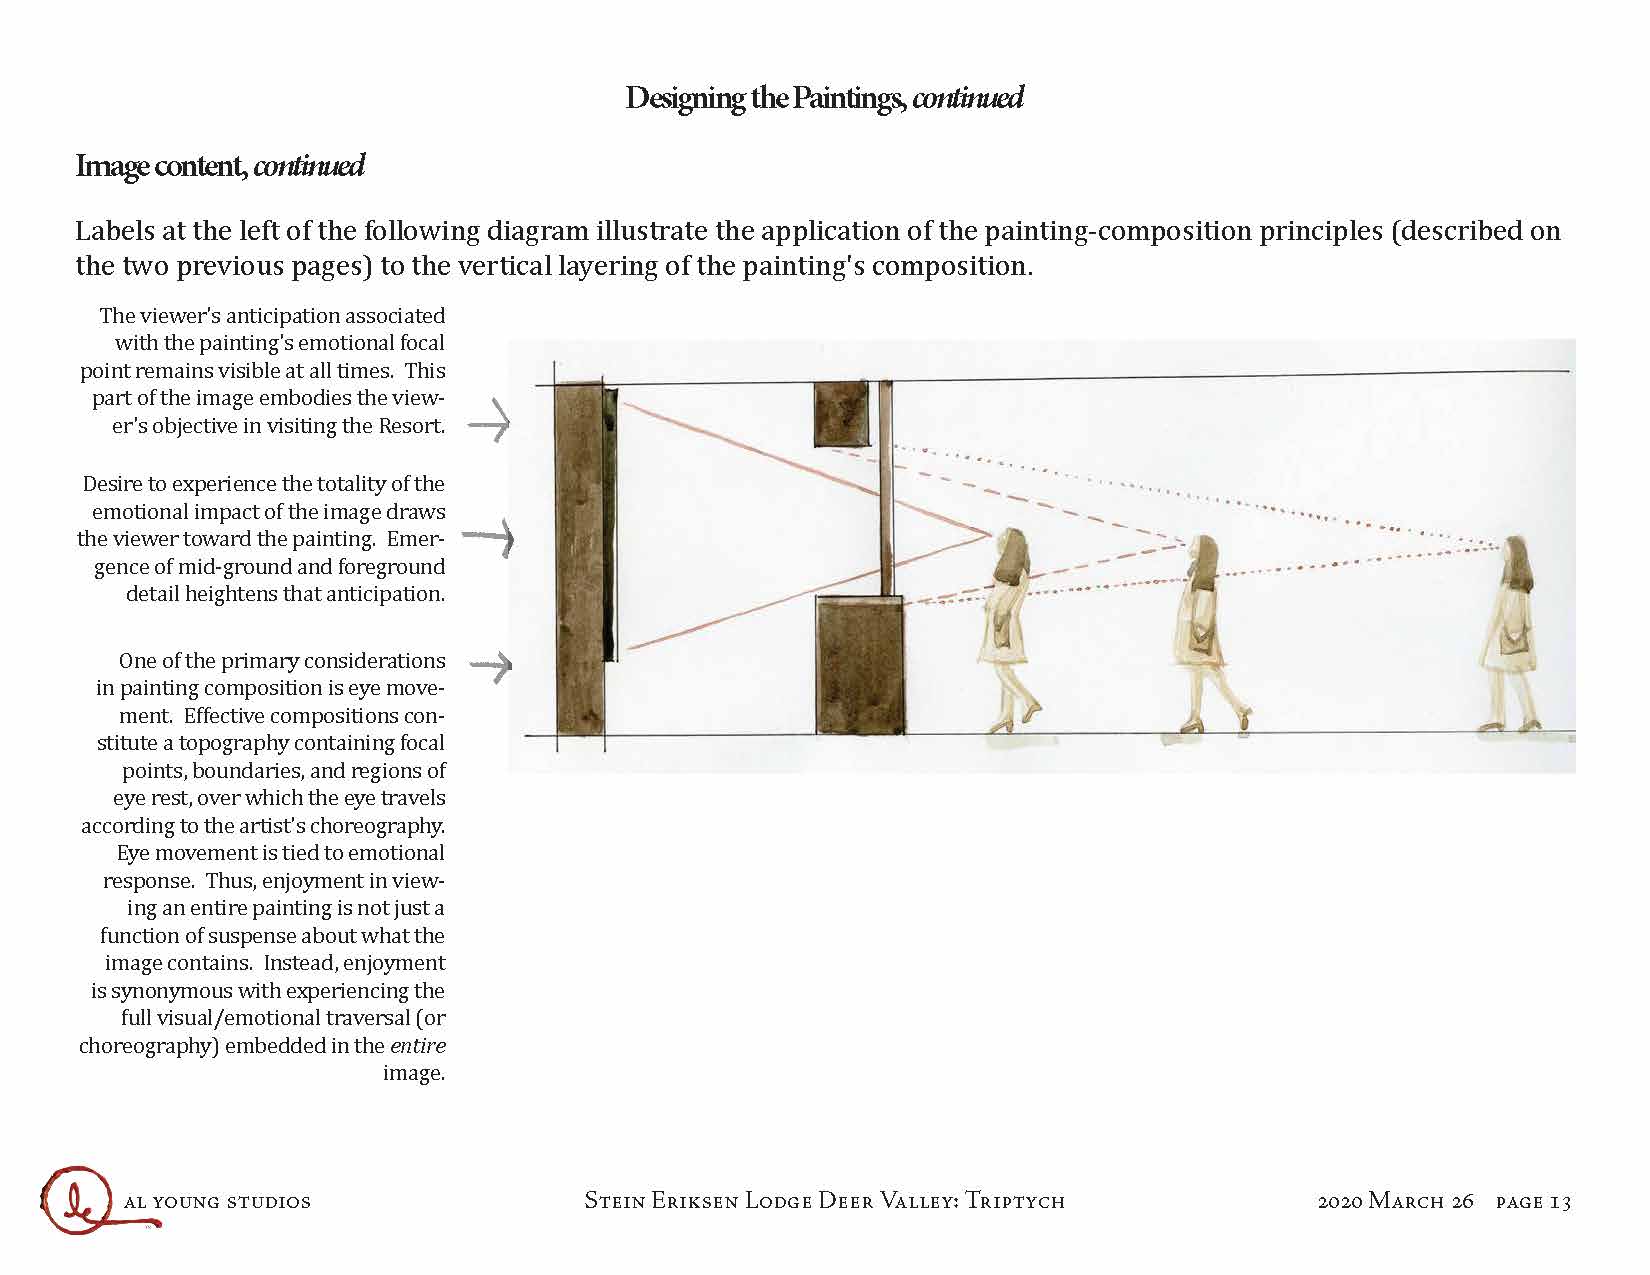 Following the February site visit, the Studios prepared a design document setting forth principles i...